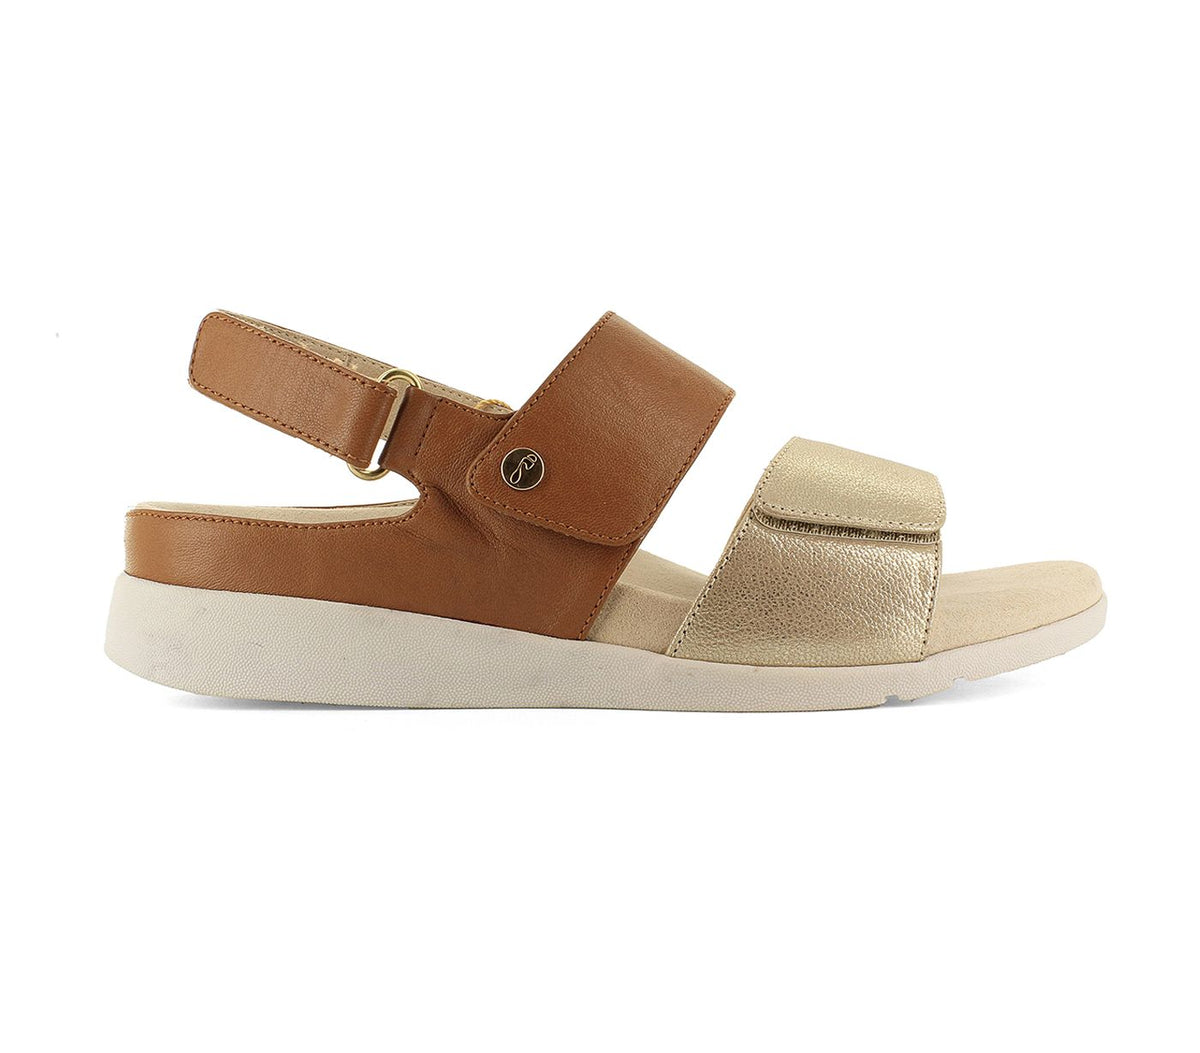 Strive - Riviera Tan and Gold Velcro Leather Sandal